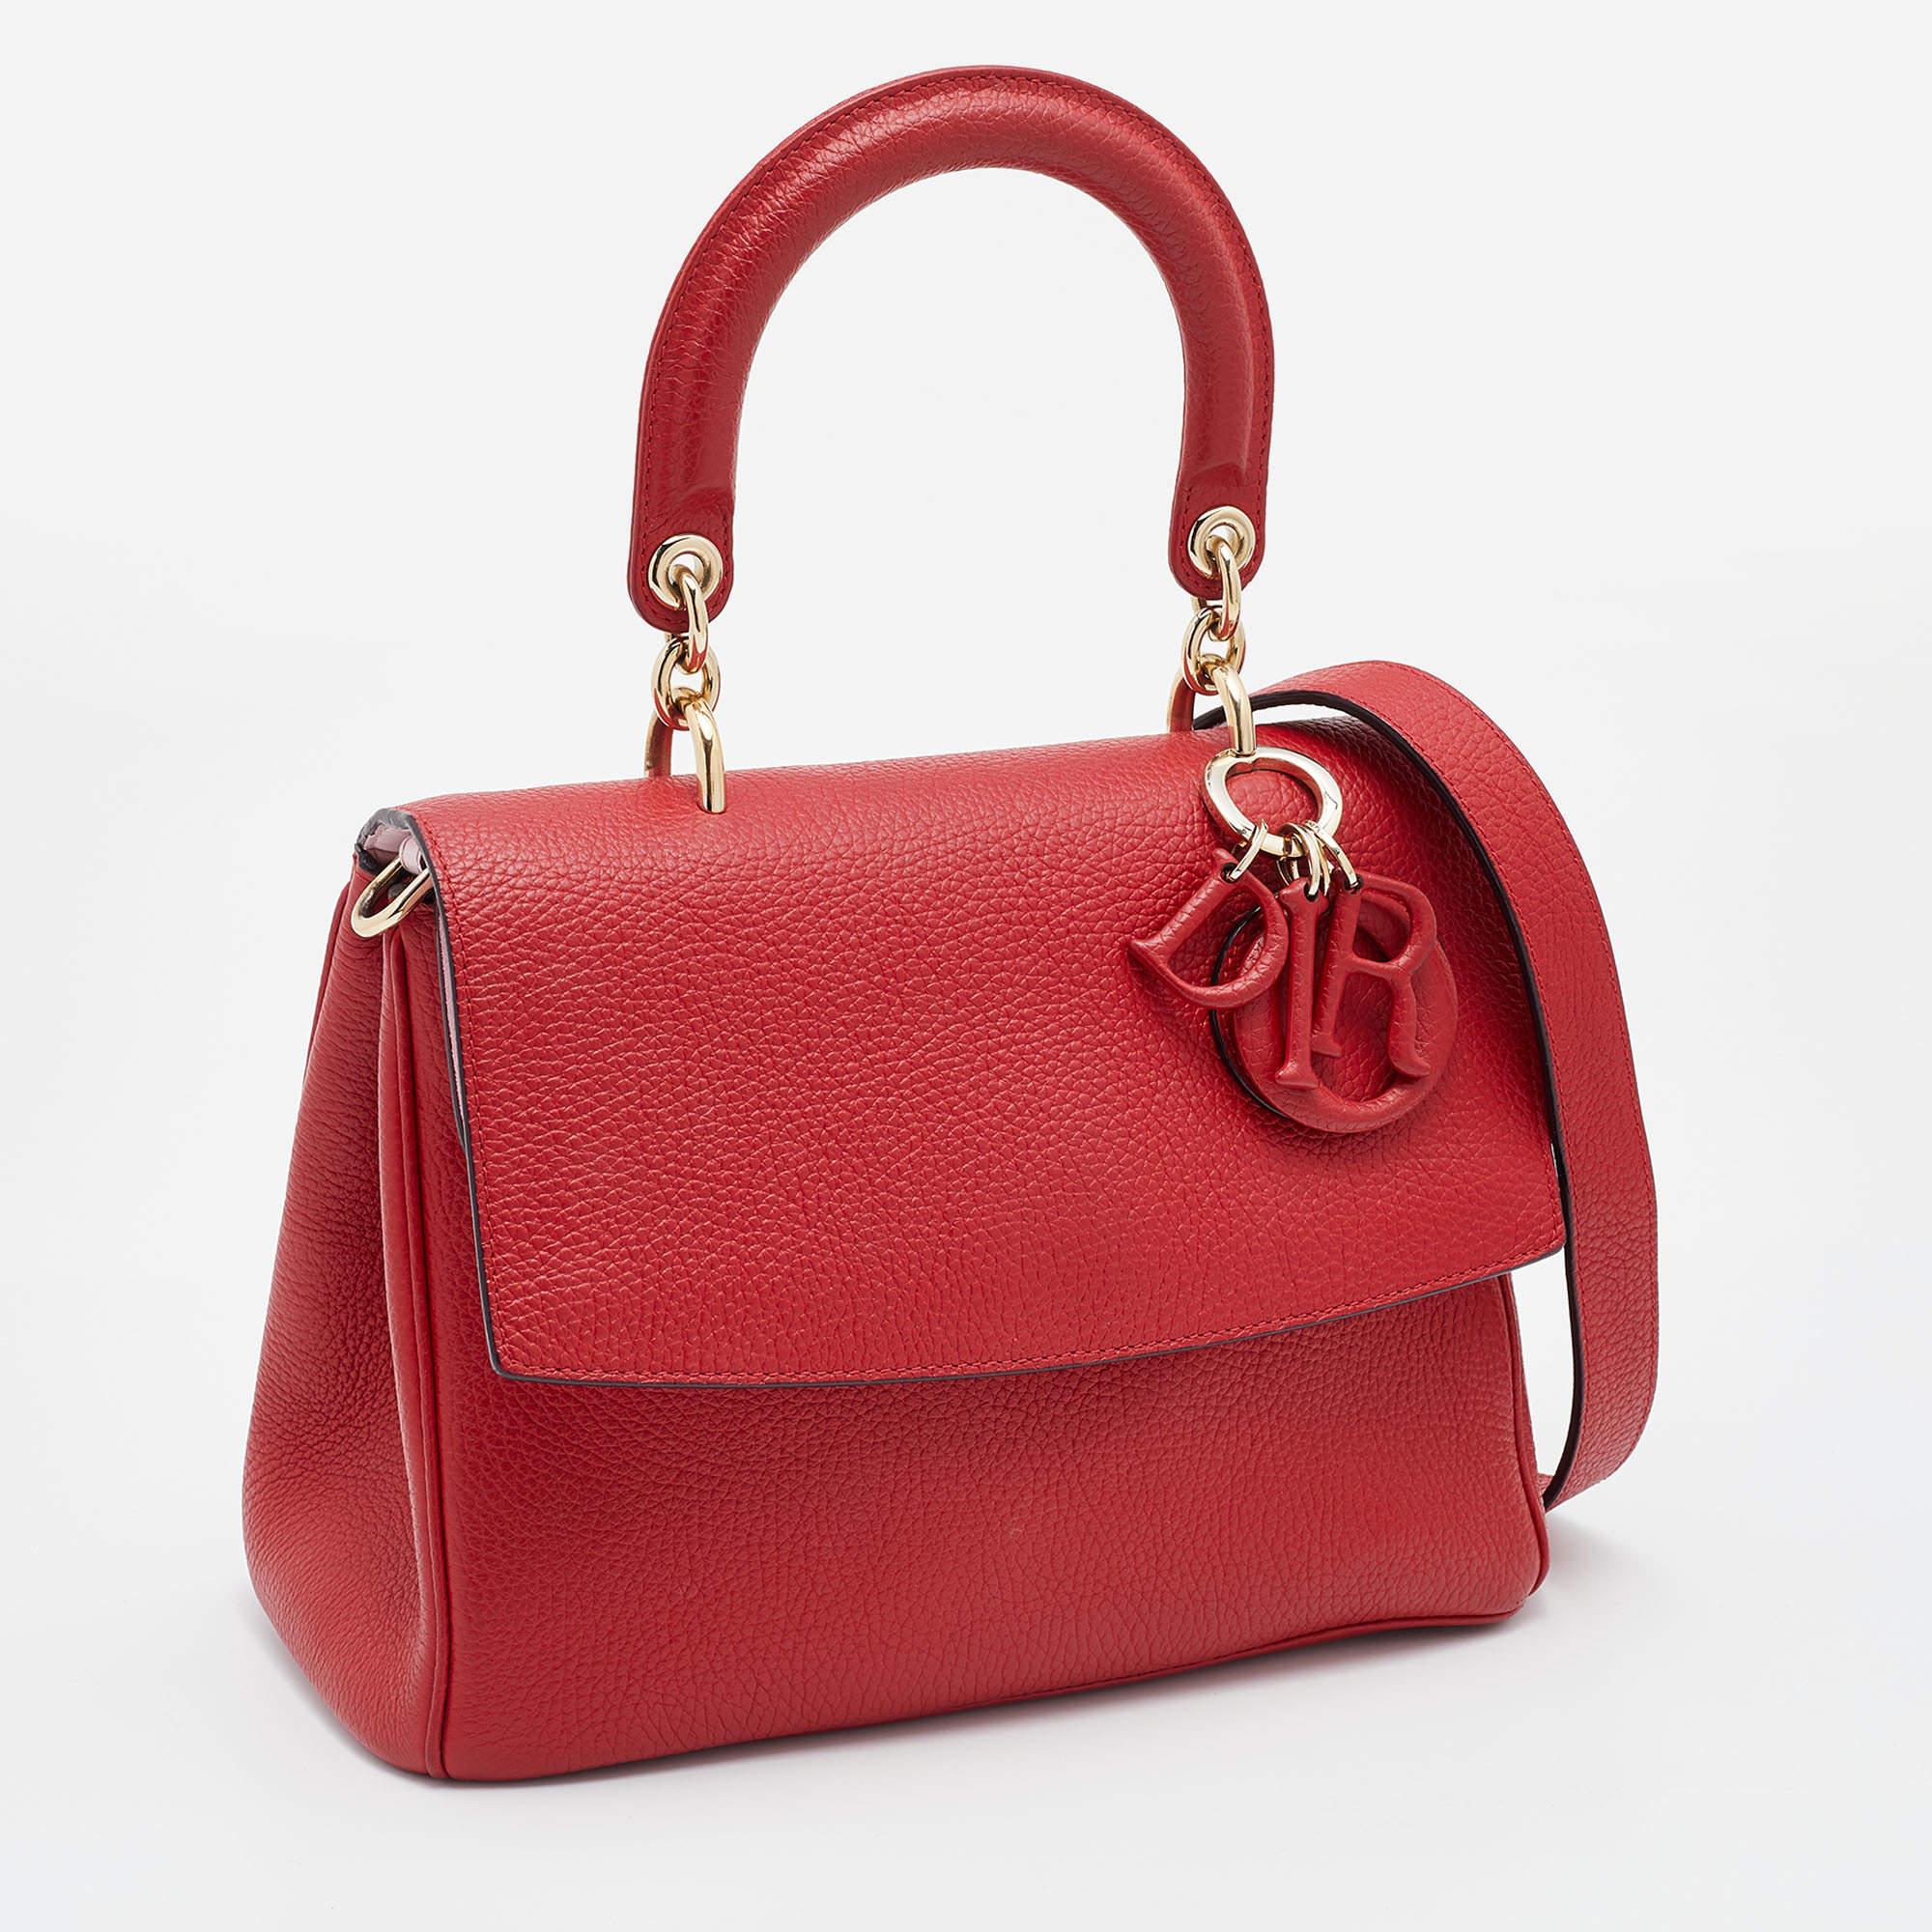 Dior Red Leather Small Be Dior Flap Top Handle Bag 2